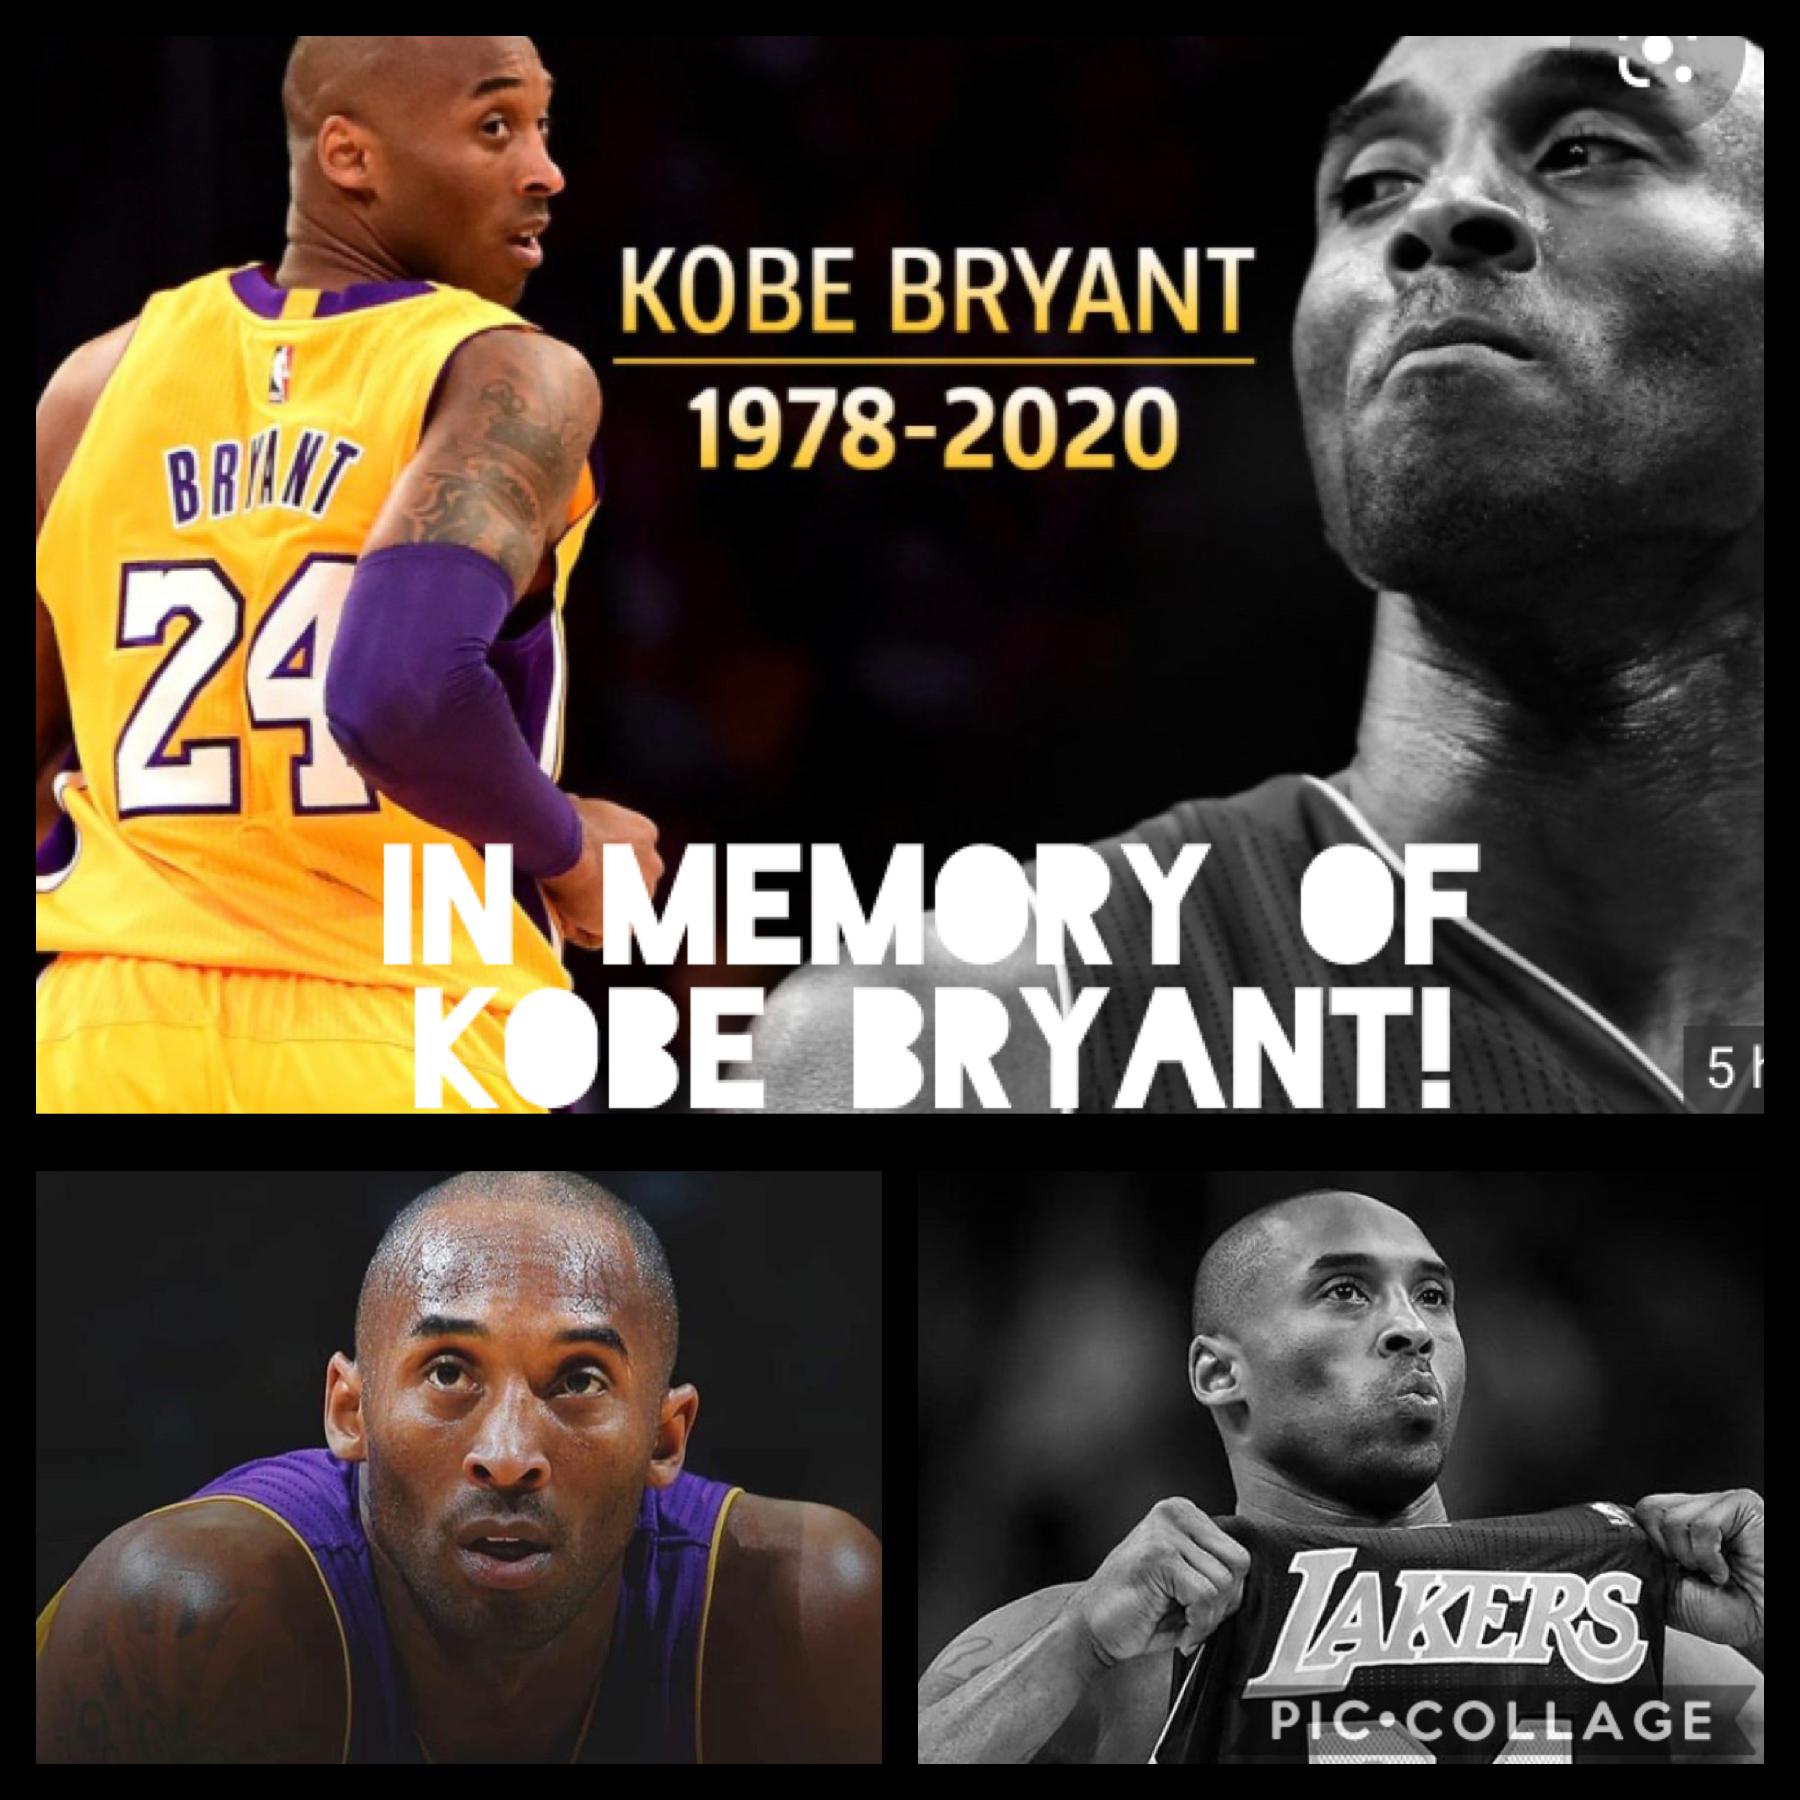 In memory of the greatest basketball player to ever live! RIP Kobe and Gianna you will be dearly missed.😢